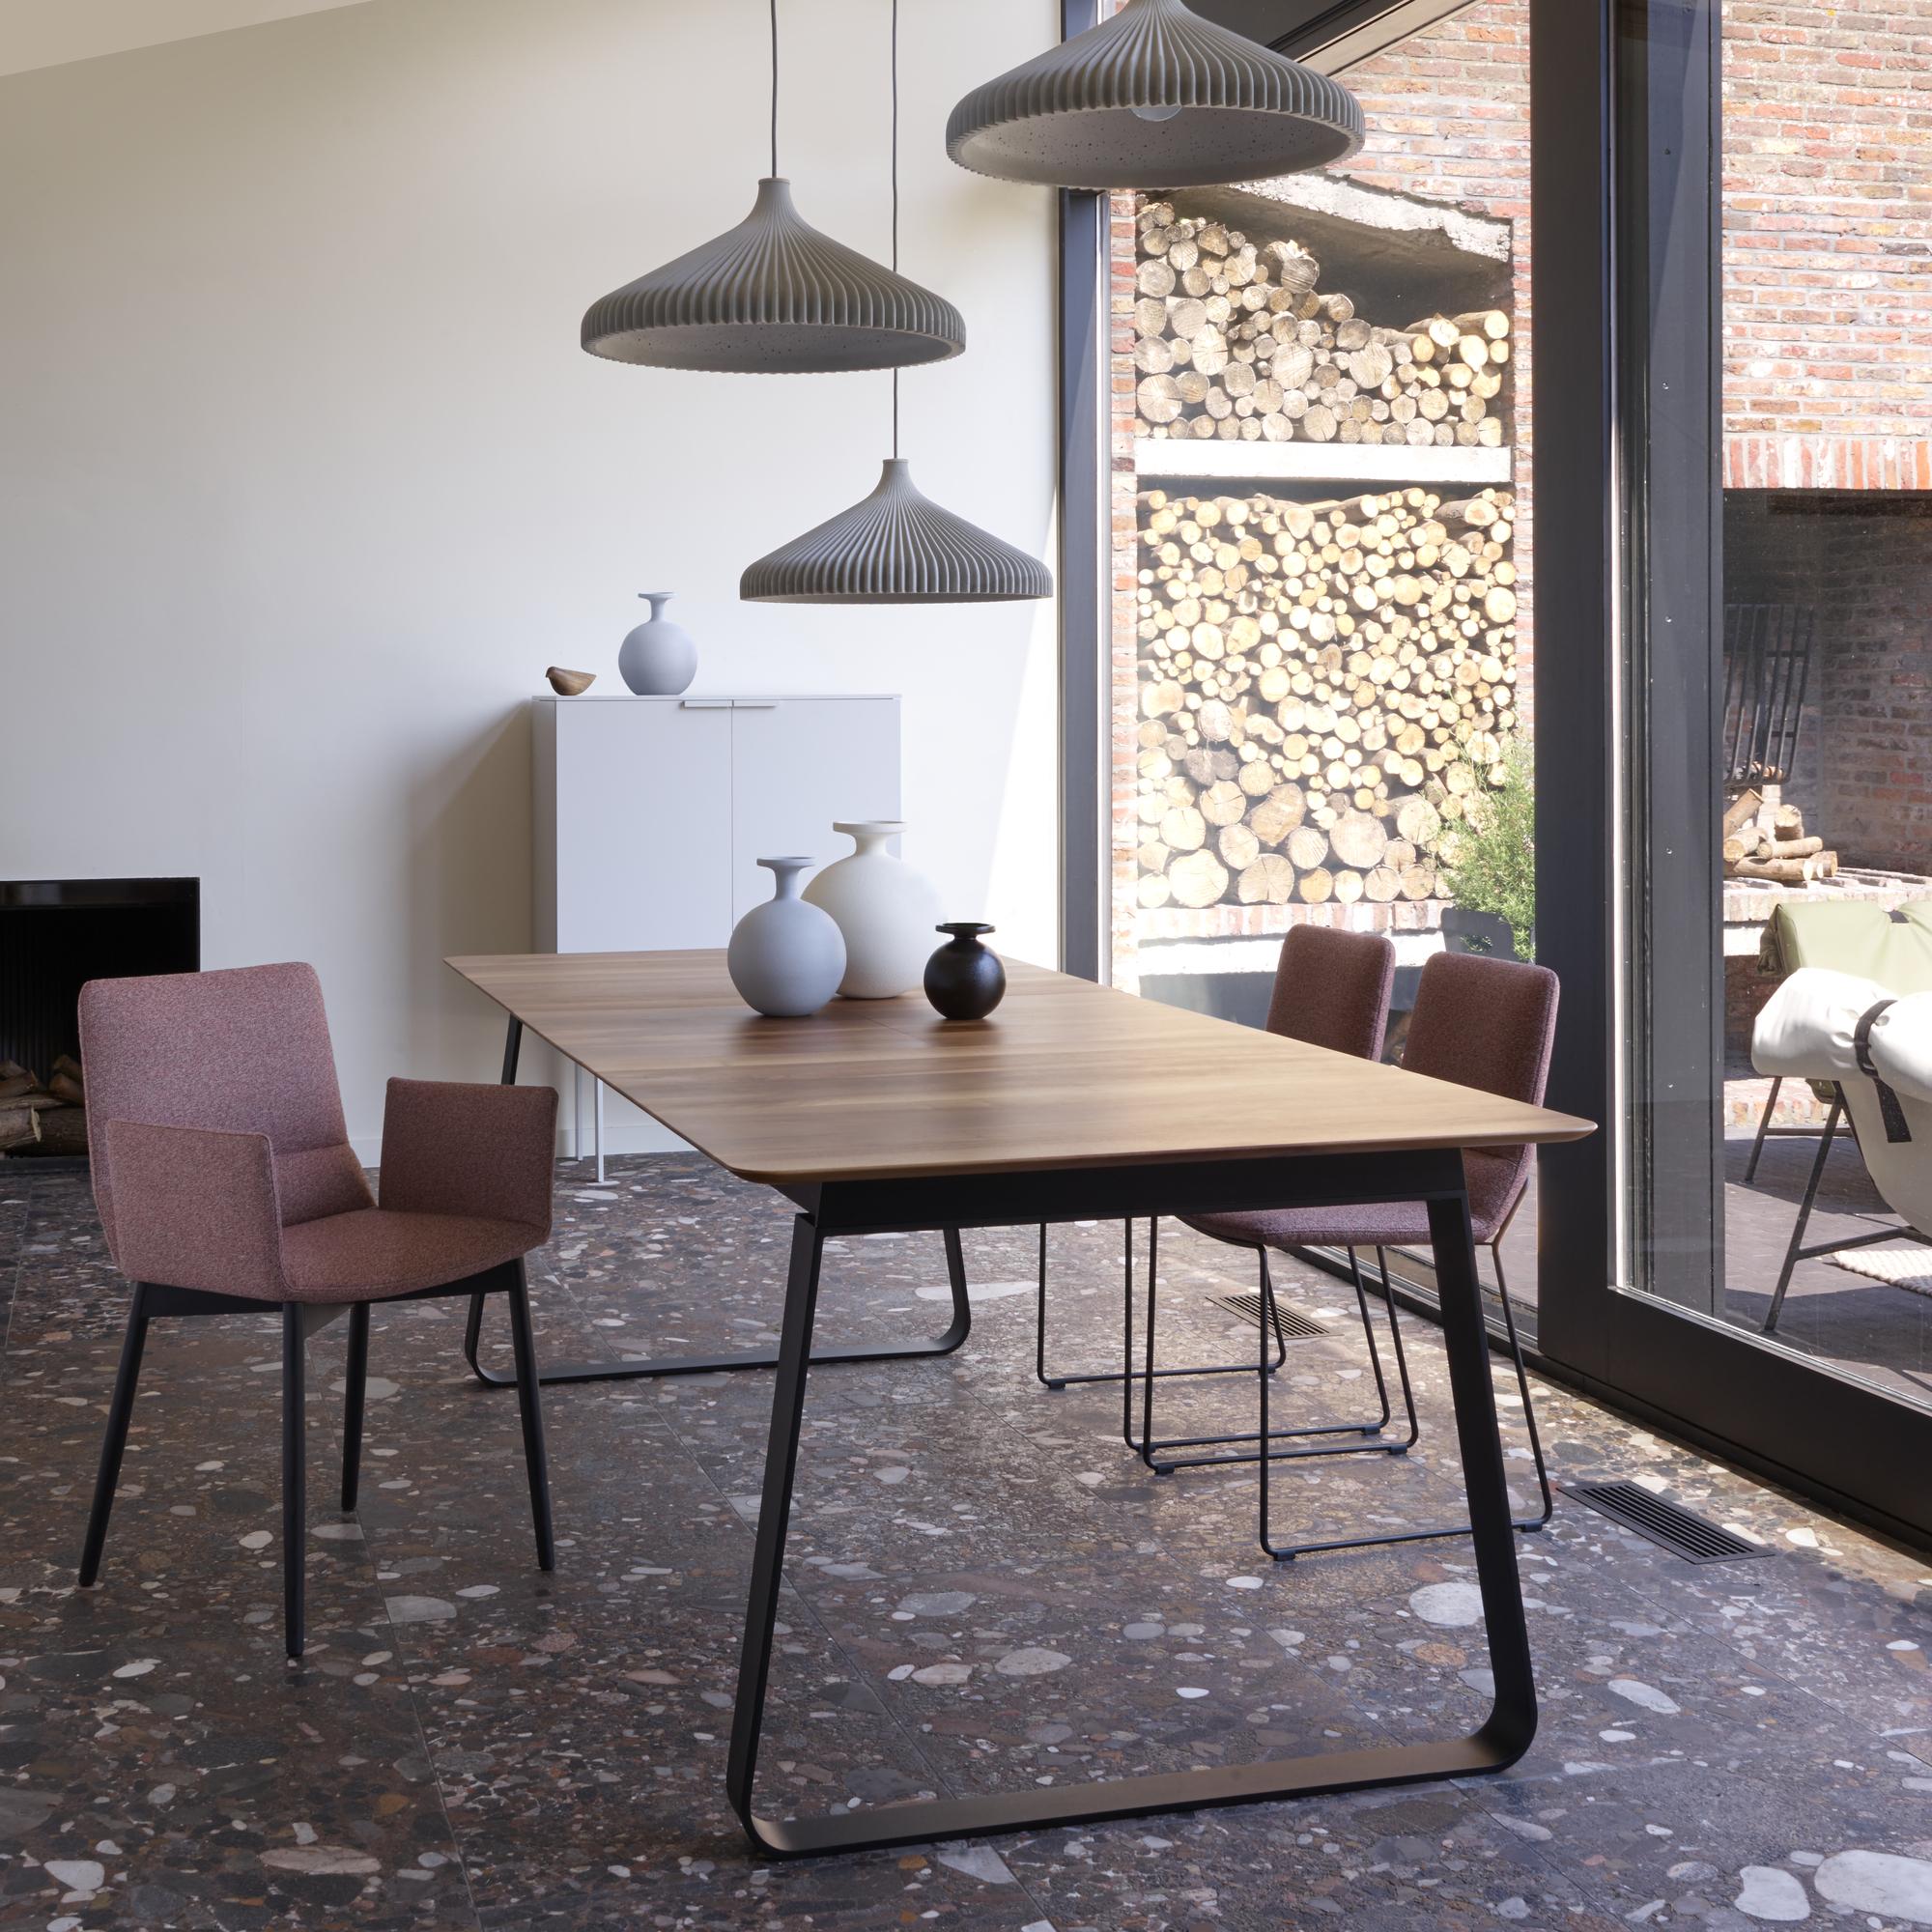 Bendchair Chairs From Designer Peter Maly Ligne Roset Official Site